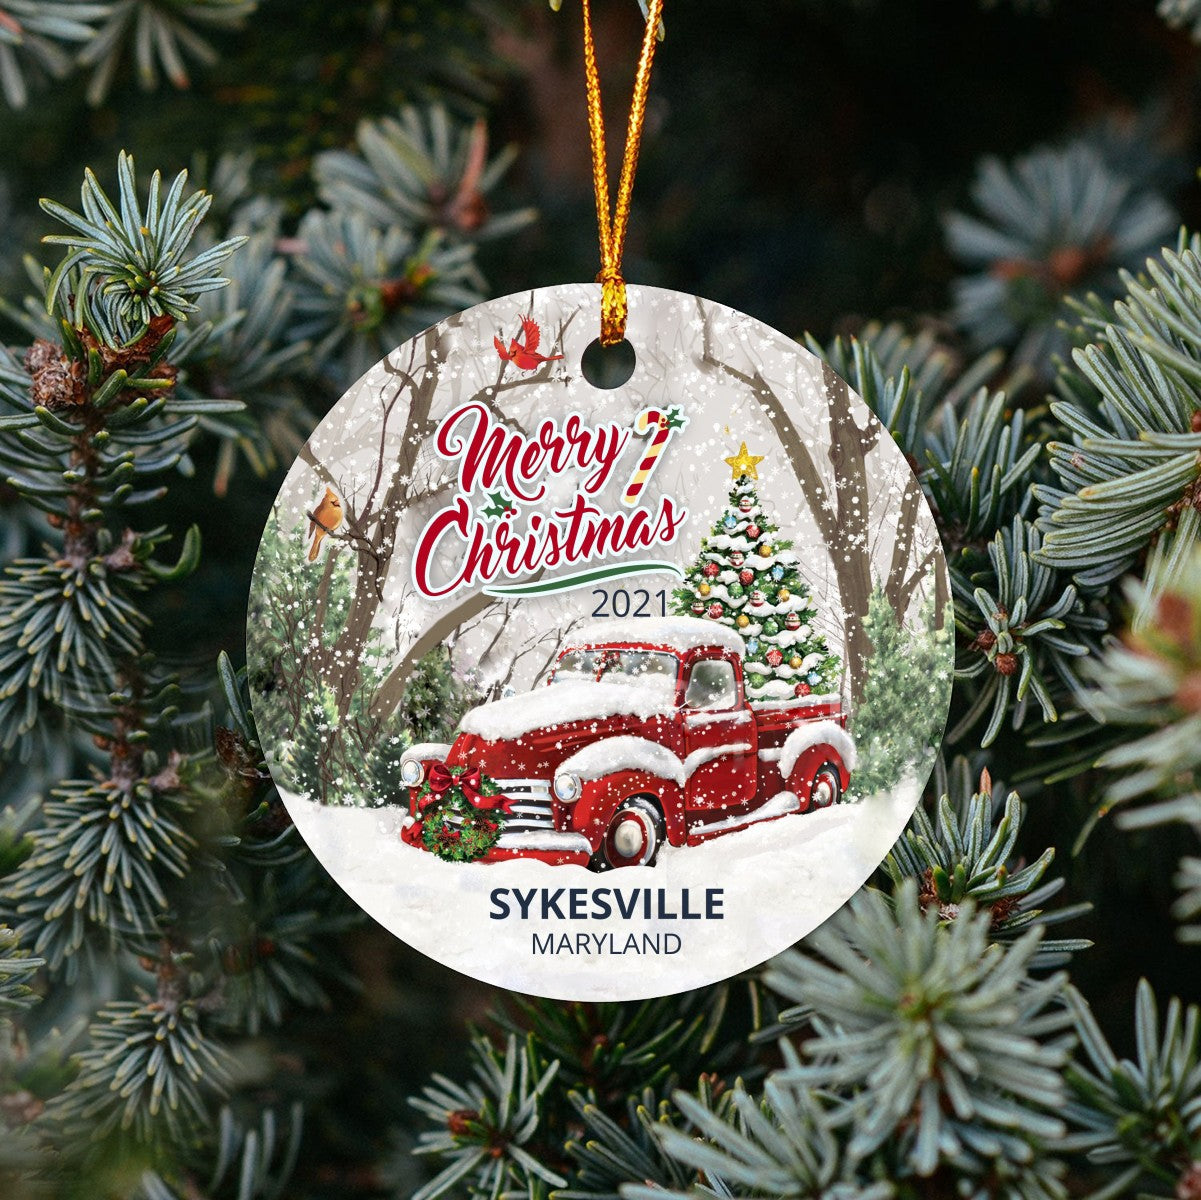 Christmas Tree Ornaments Sykesville - Ornament With Name City, State Sykesville Maryland MD Ornament - Red Truck Xmas Ornaments 3'' Plastic Gift For Family, Friend And Housewarming